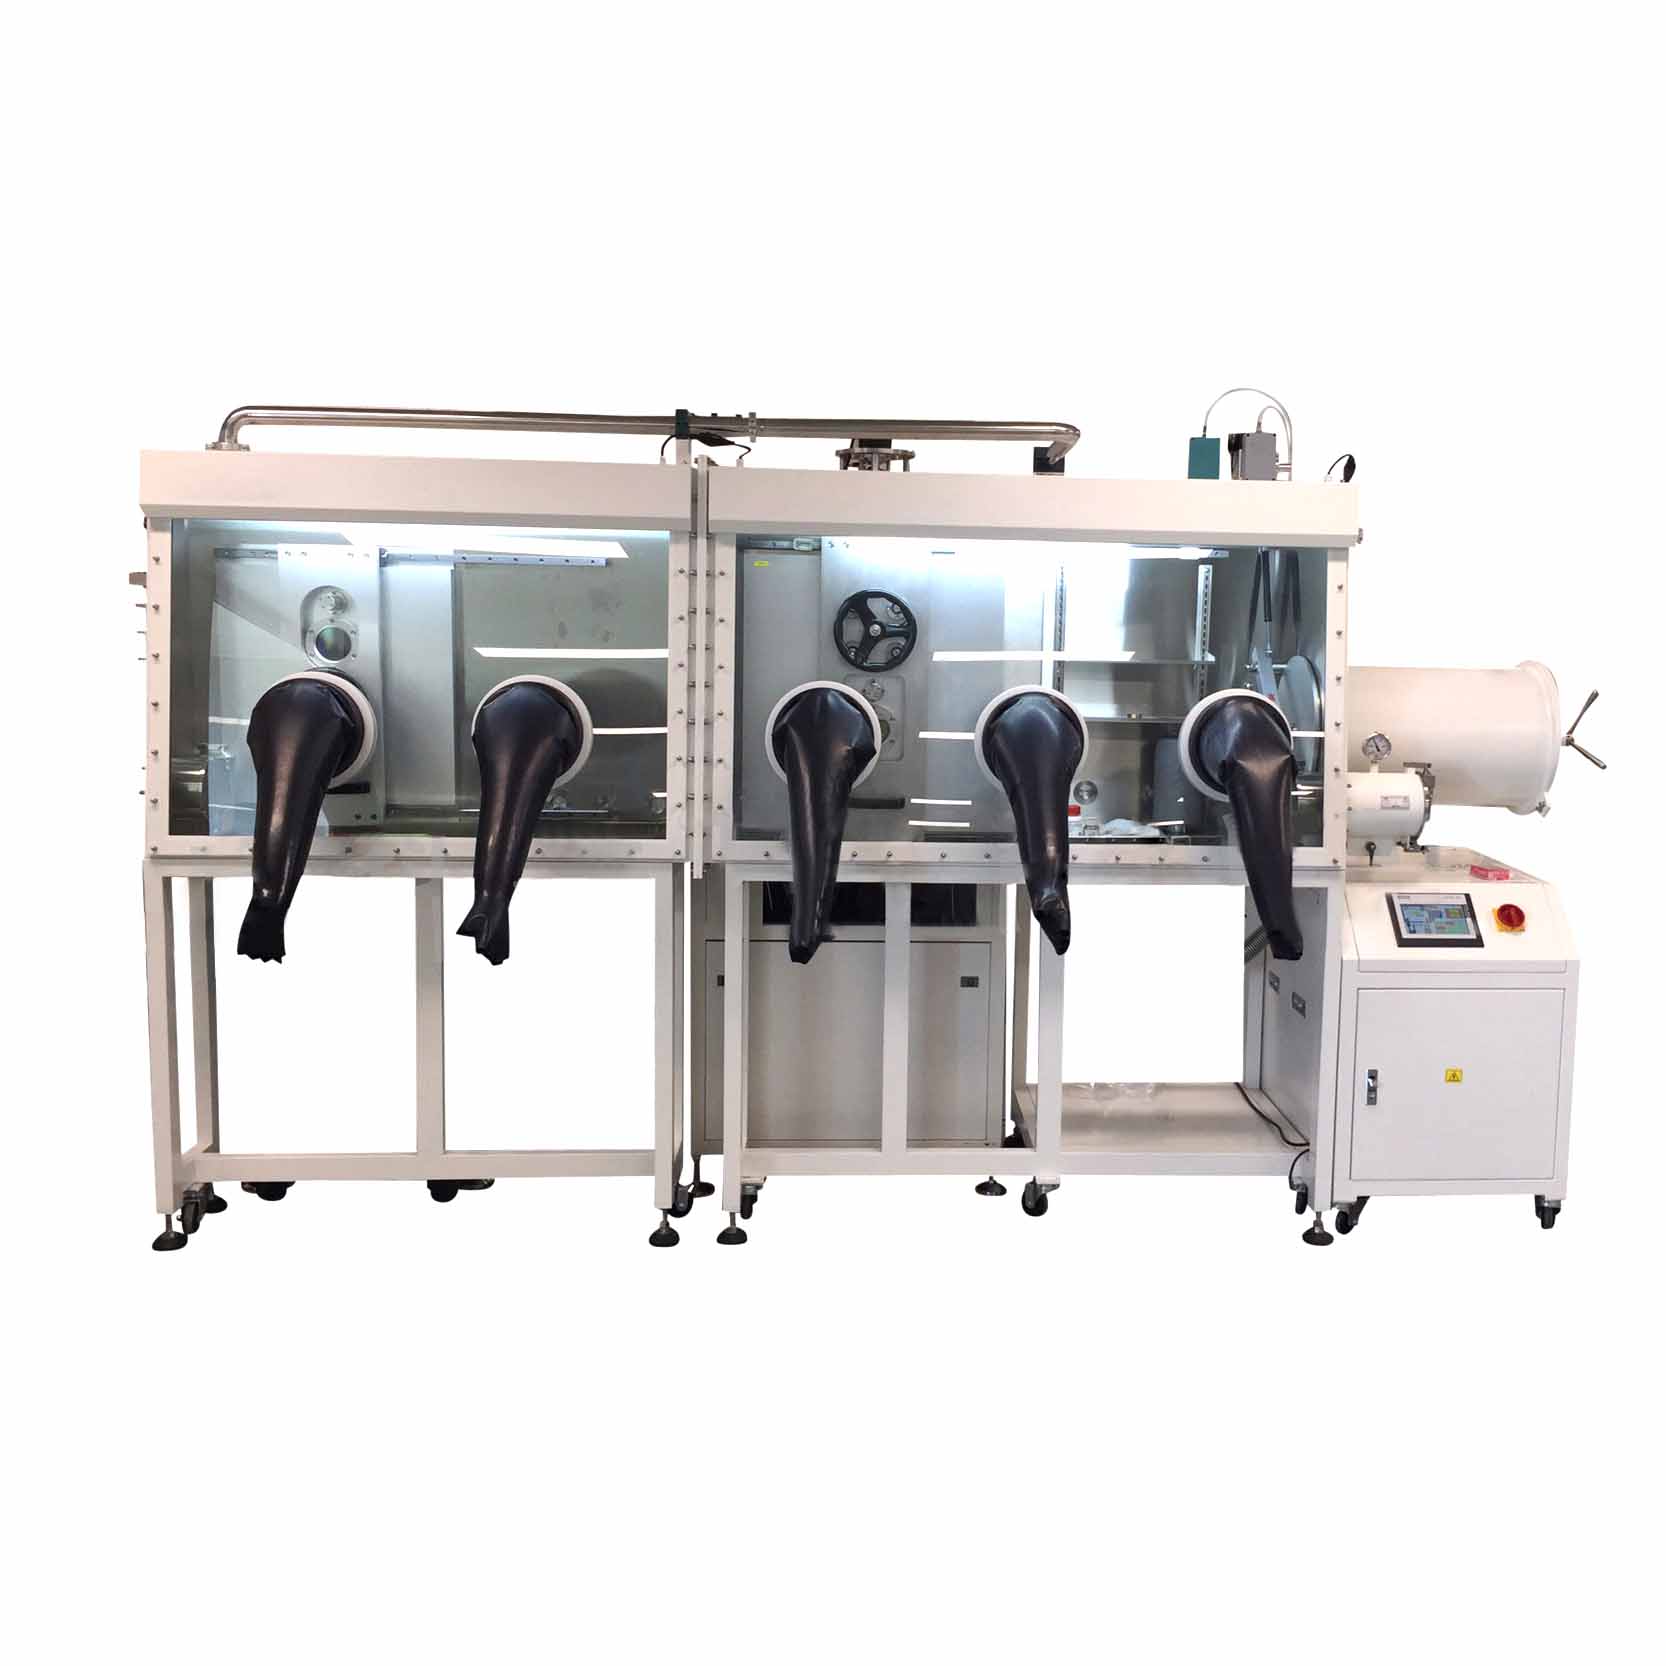 Evaporation and Glove Box Composite Coater